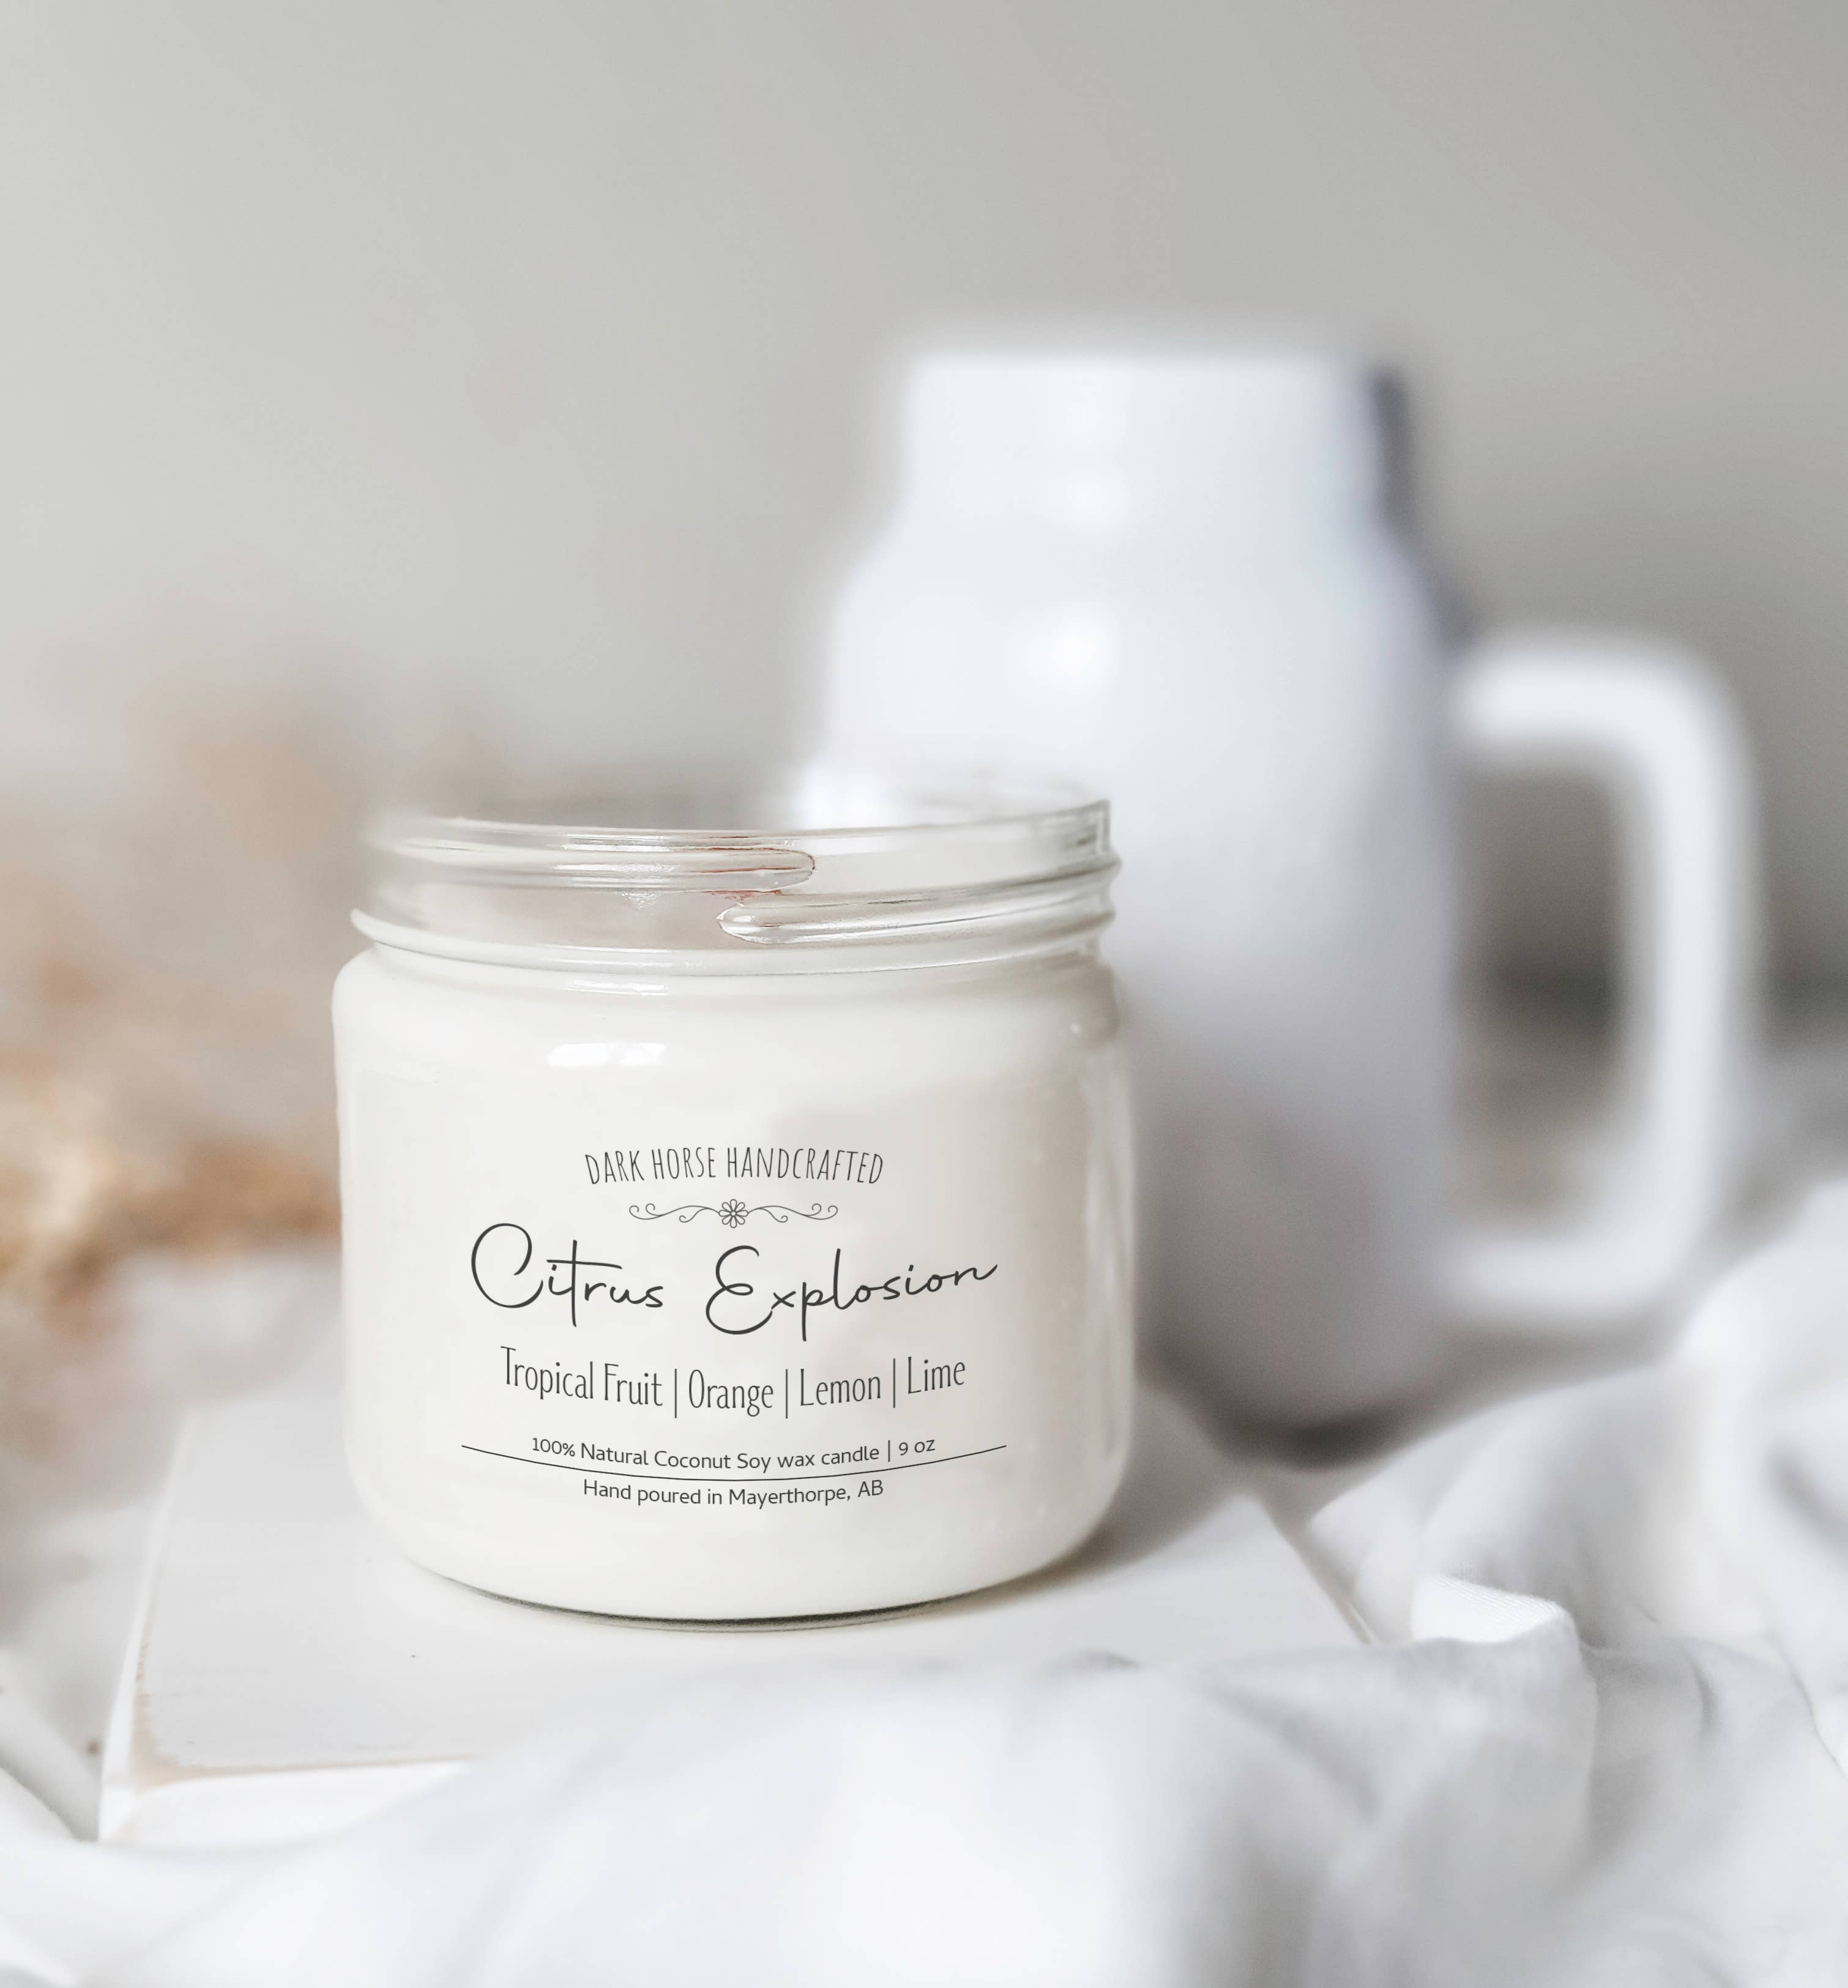 Citrus Explosion - 100% Natural Coconut Soy Wax Candle